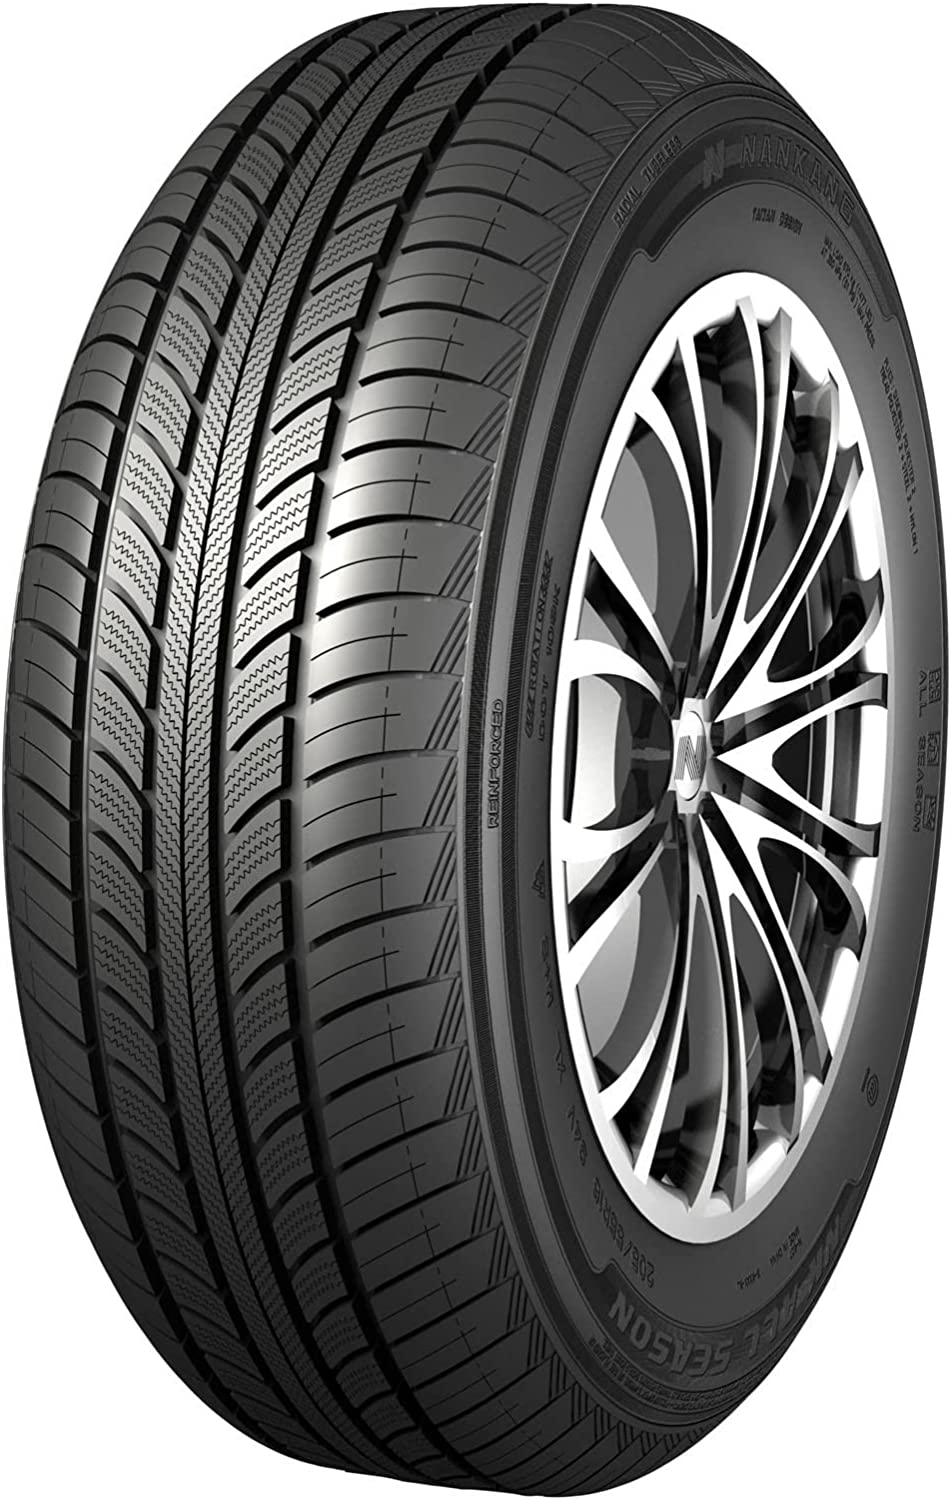 Gomme Nuove Nankang 155/65 R13 73T N607+ M+S pneumatici nuovi All Season